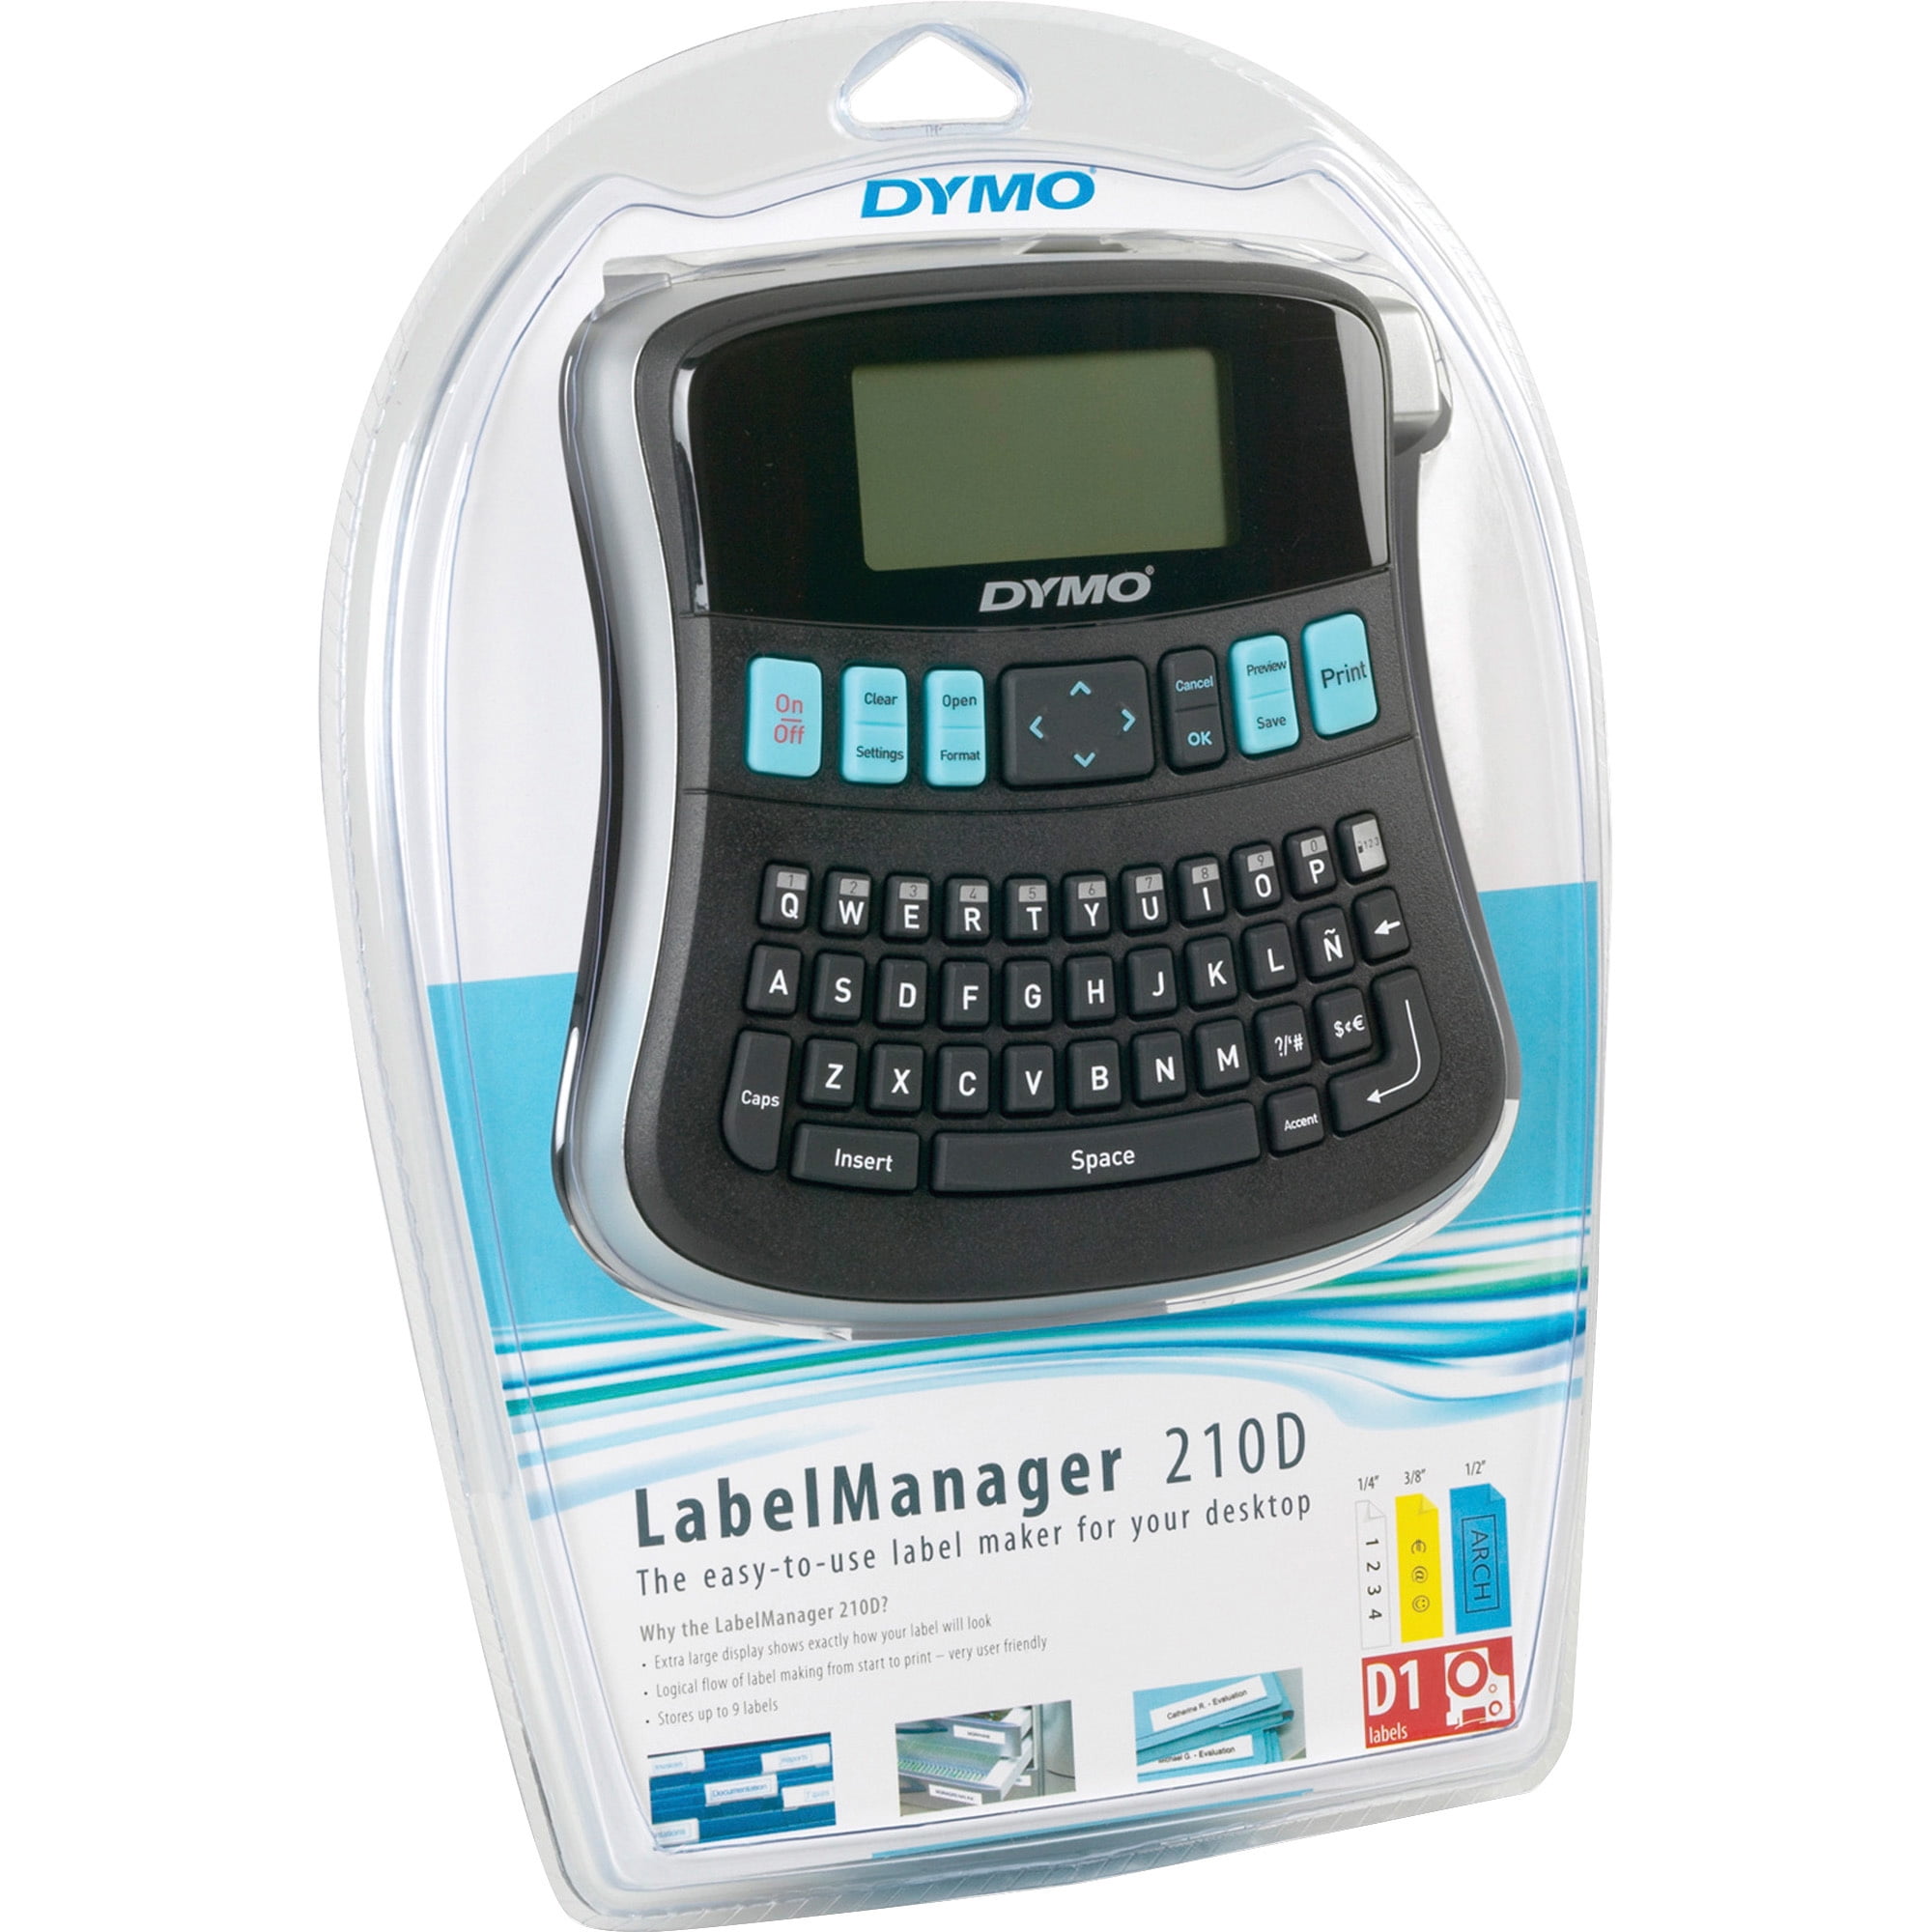  DYMO Label Maker LabelManager 160 Portable Label Maker,  Easy-to-Use, One-Touch Smart Keys, QWERTY Keyboard, Large Display, for Home  & Office Organization, Black : Office Products